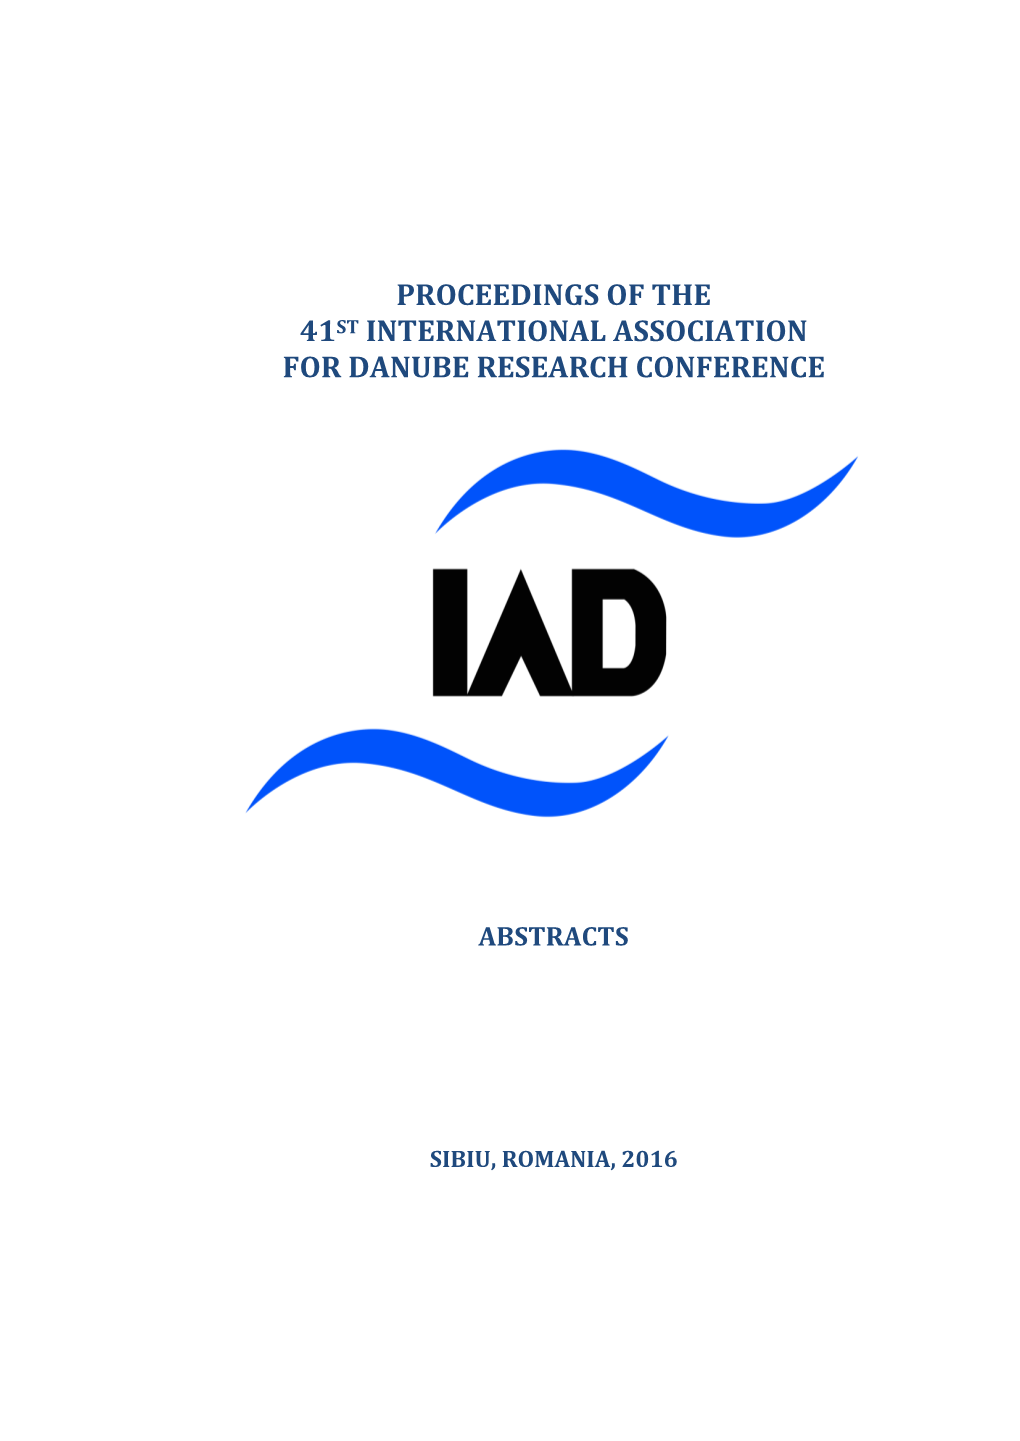 Proceedings of the 41St International Association for Danube Research Conference